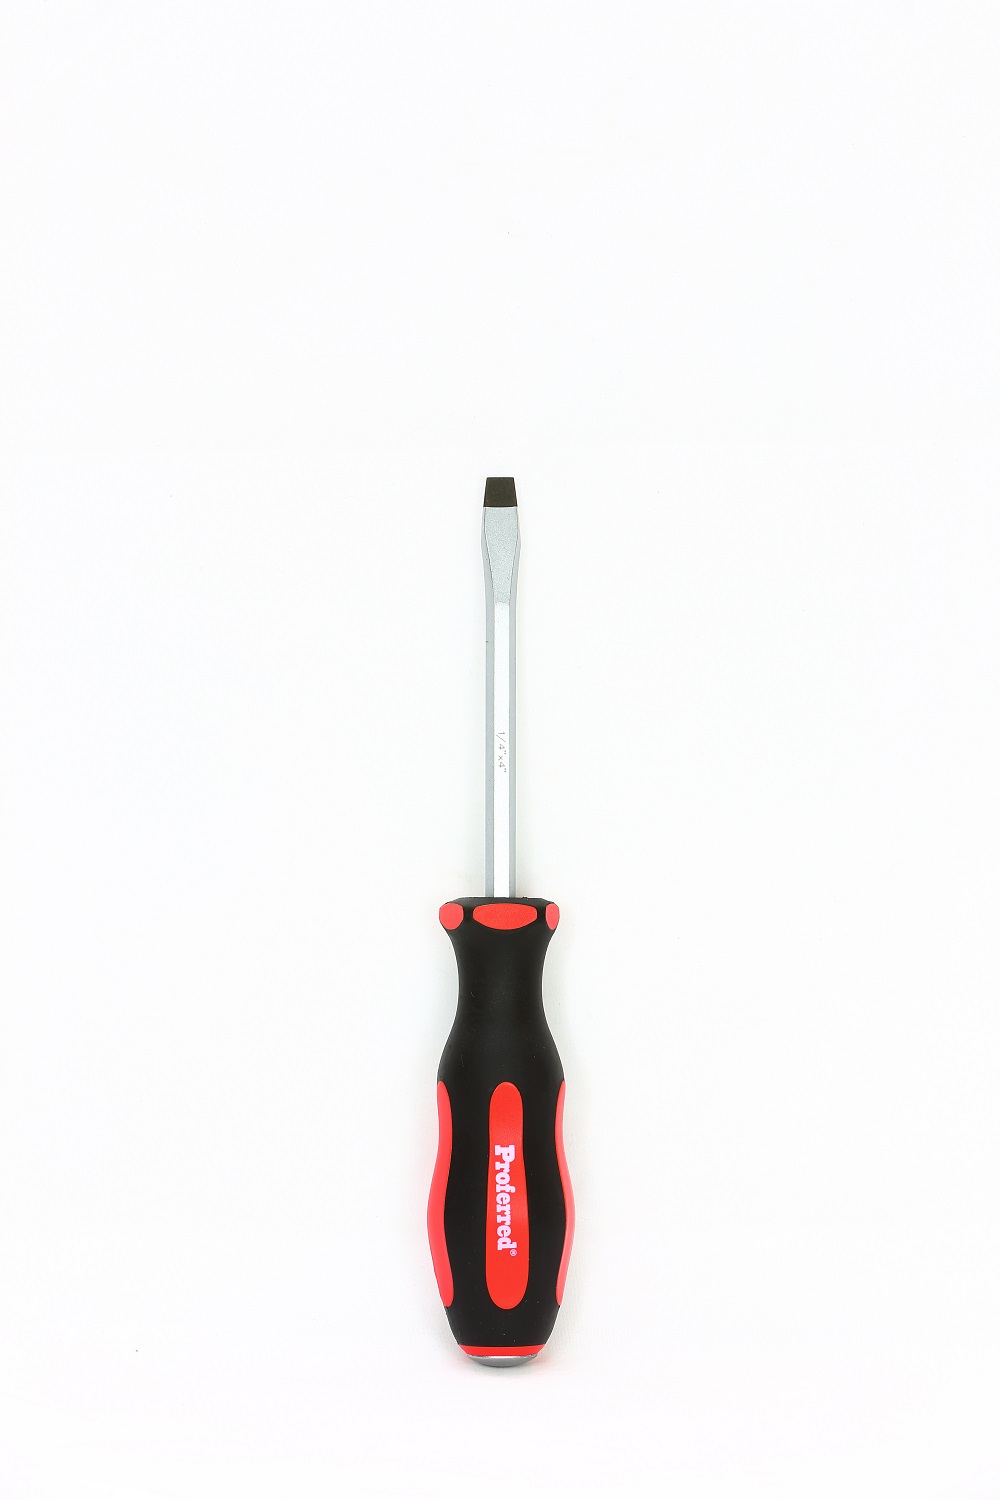 PROFERRED GO-THRU SCREWDRIVER SLOTTED 1/4''X4'' RED HANDLE 